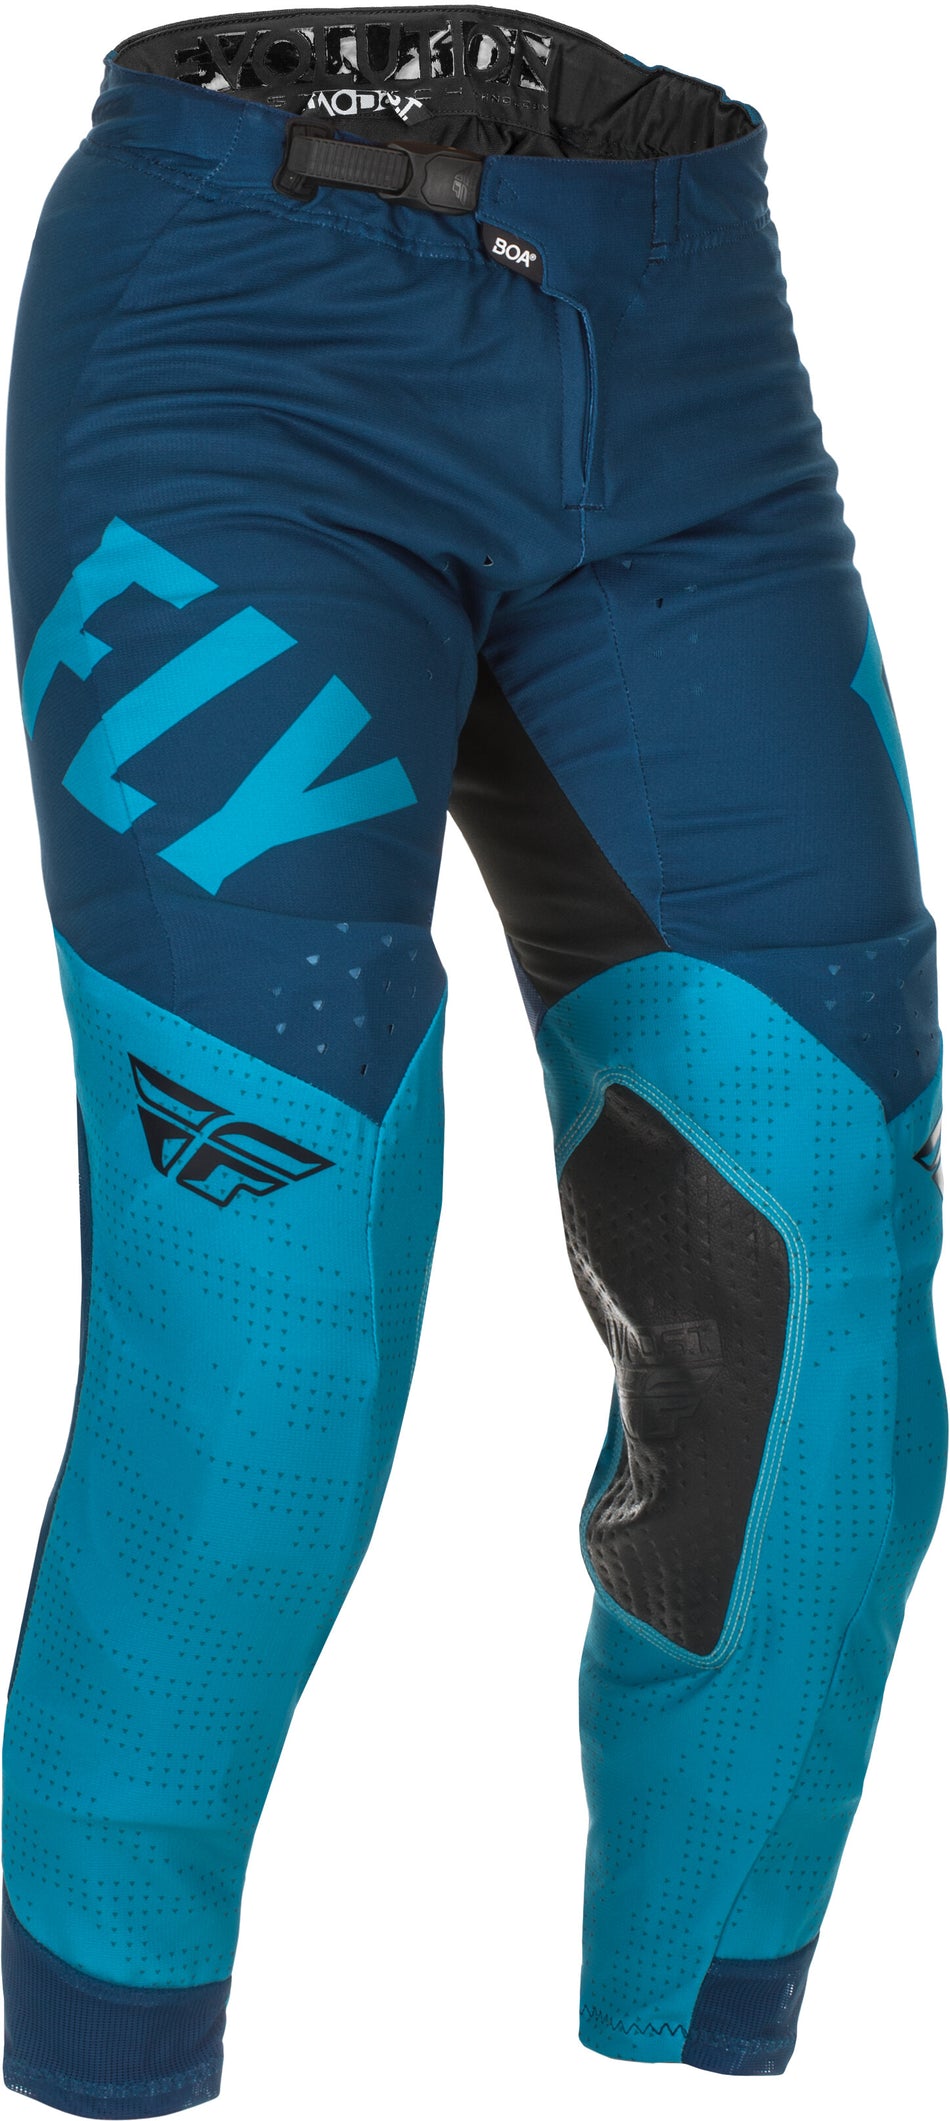 FLY RACING Evolution Dst Pants Blue/Navy Sz 32 374-13132